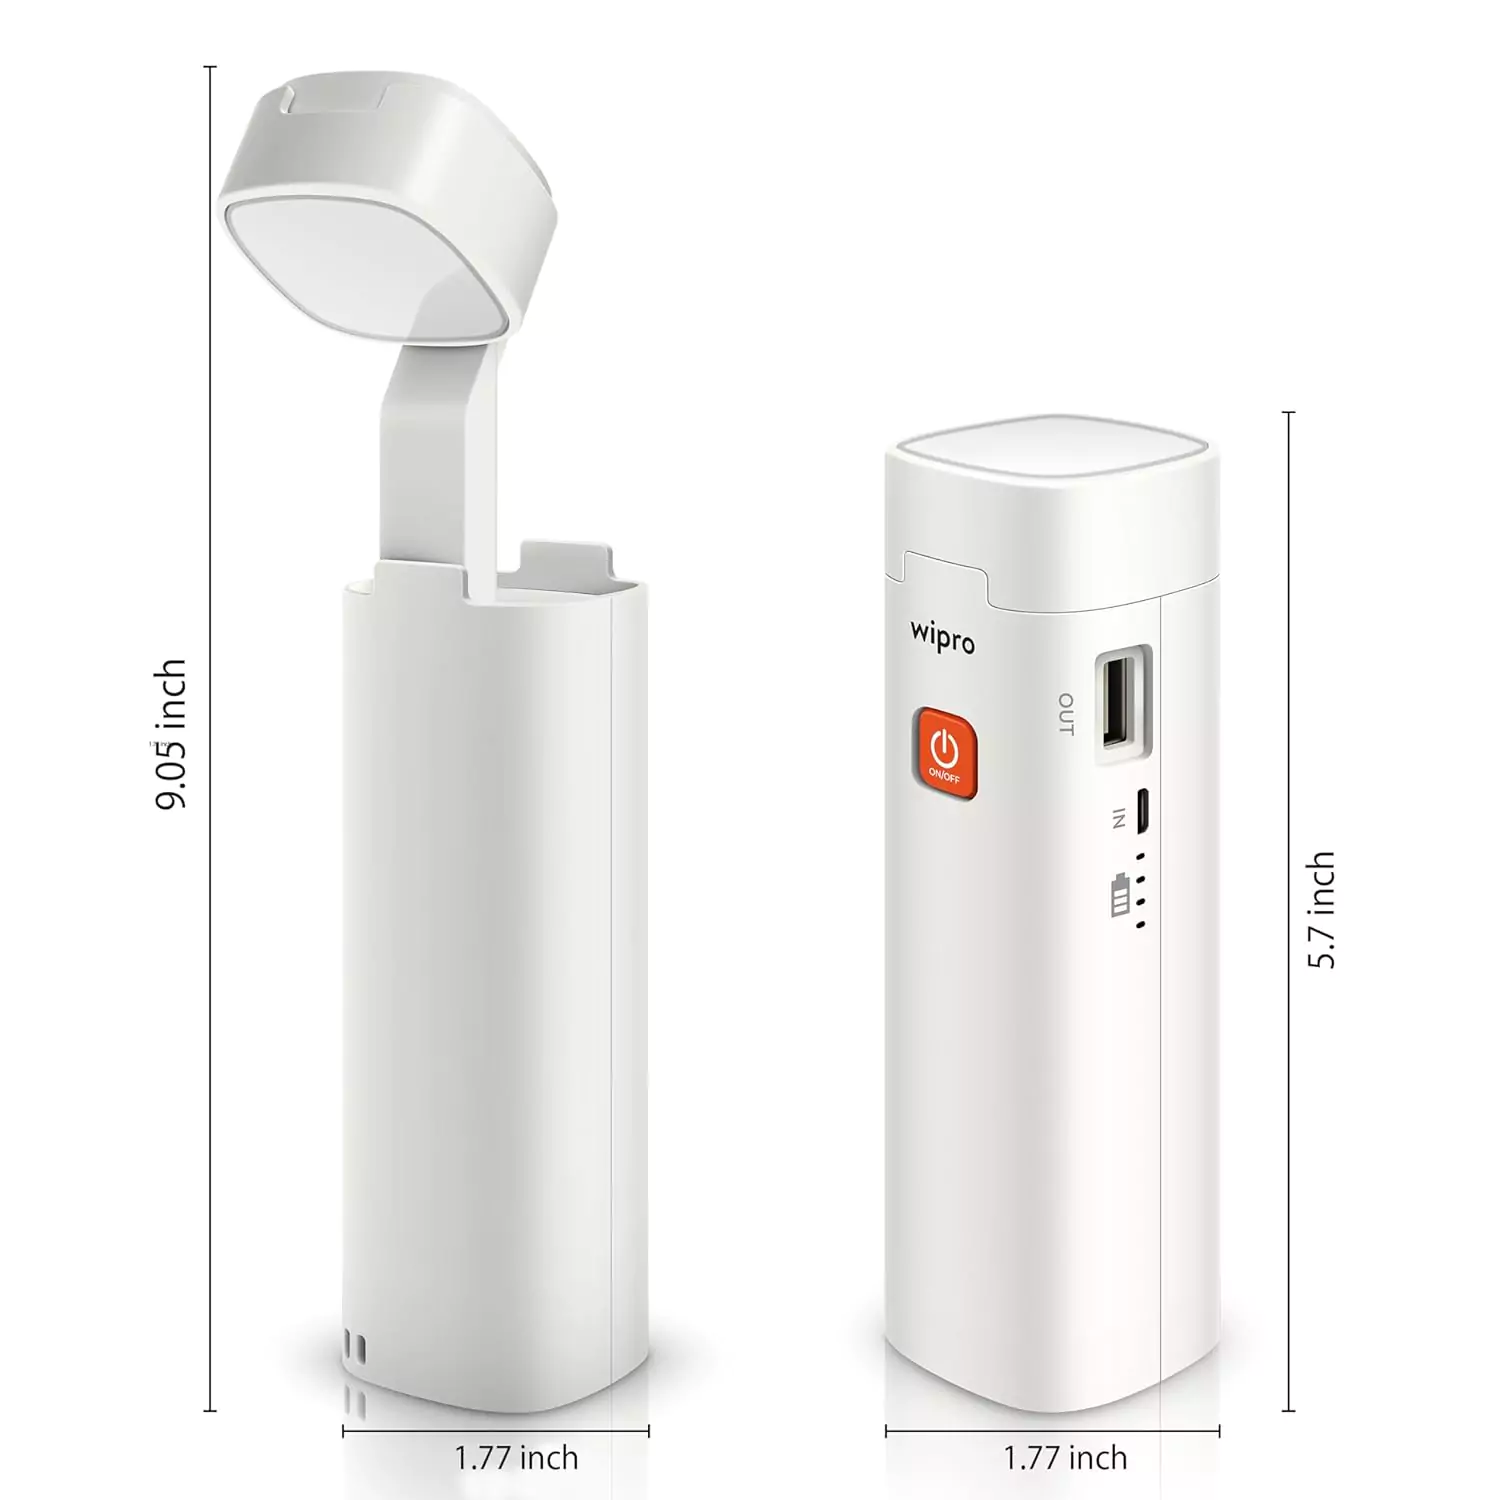 A multifunctional rechargeable emergency light with various brightness settings displayed on a table.